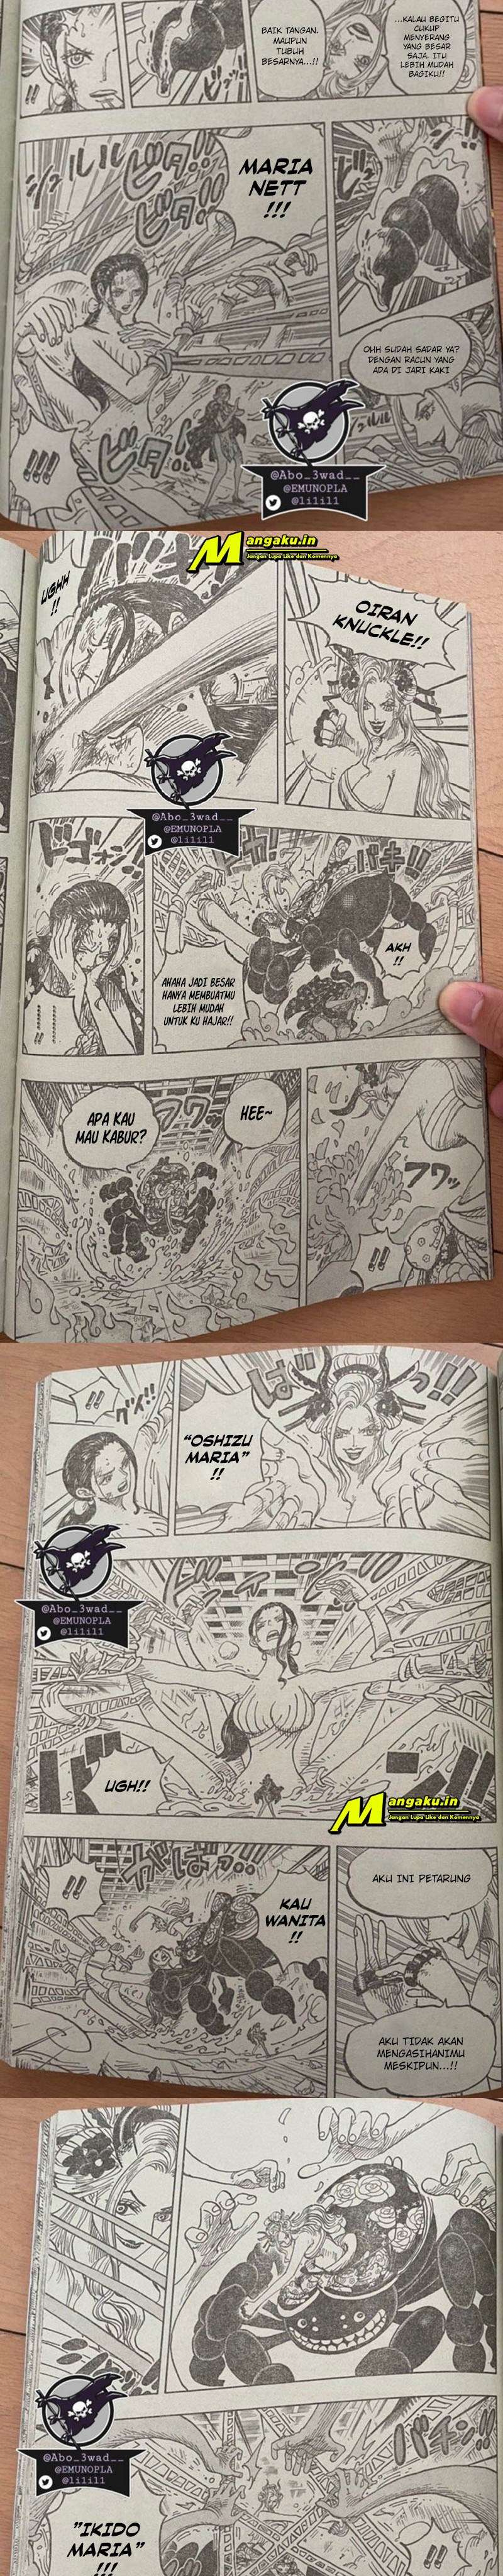 One Piece Chapter 1021 LQ Image 1